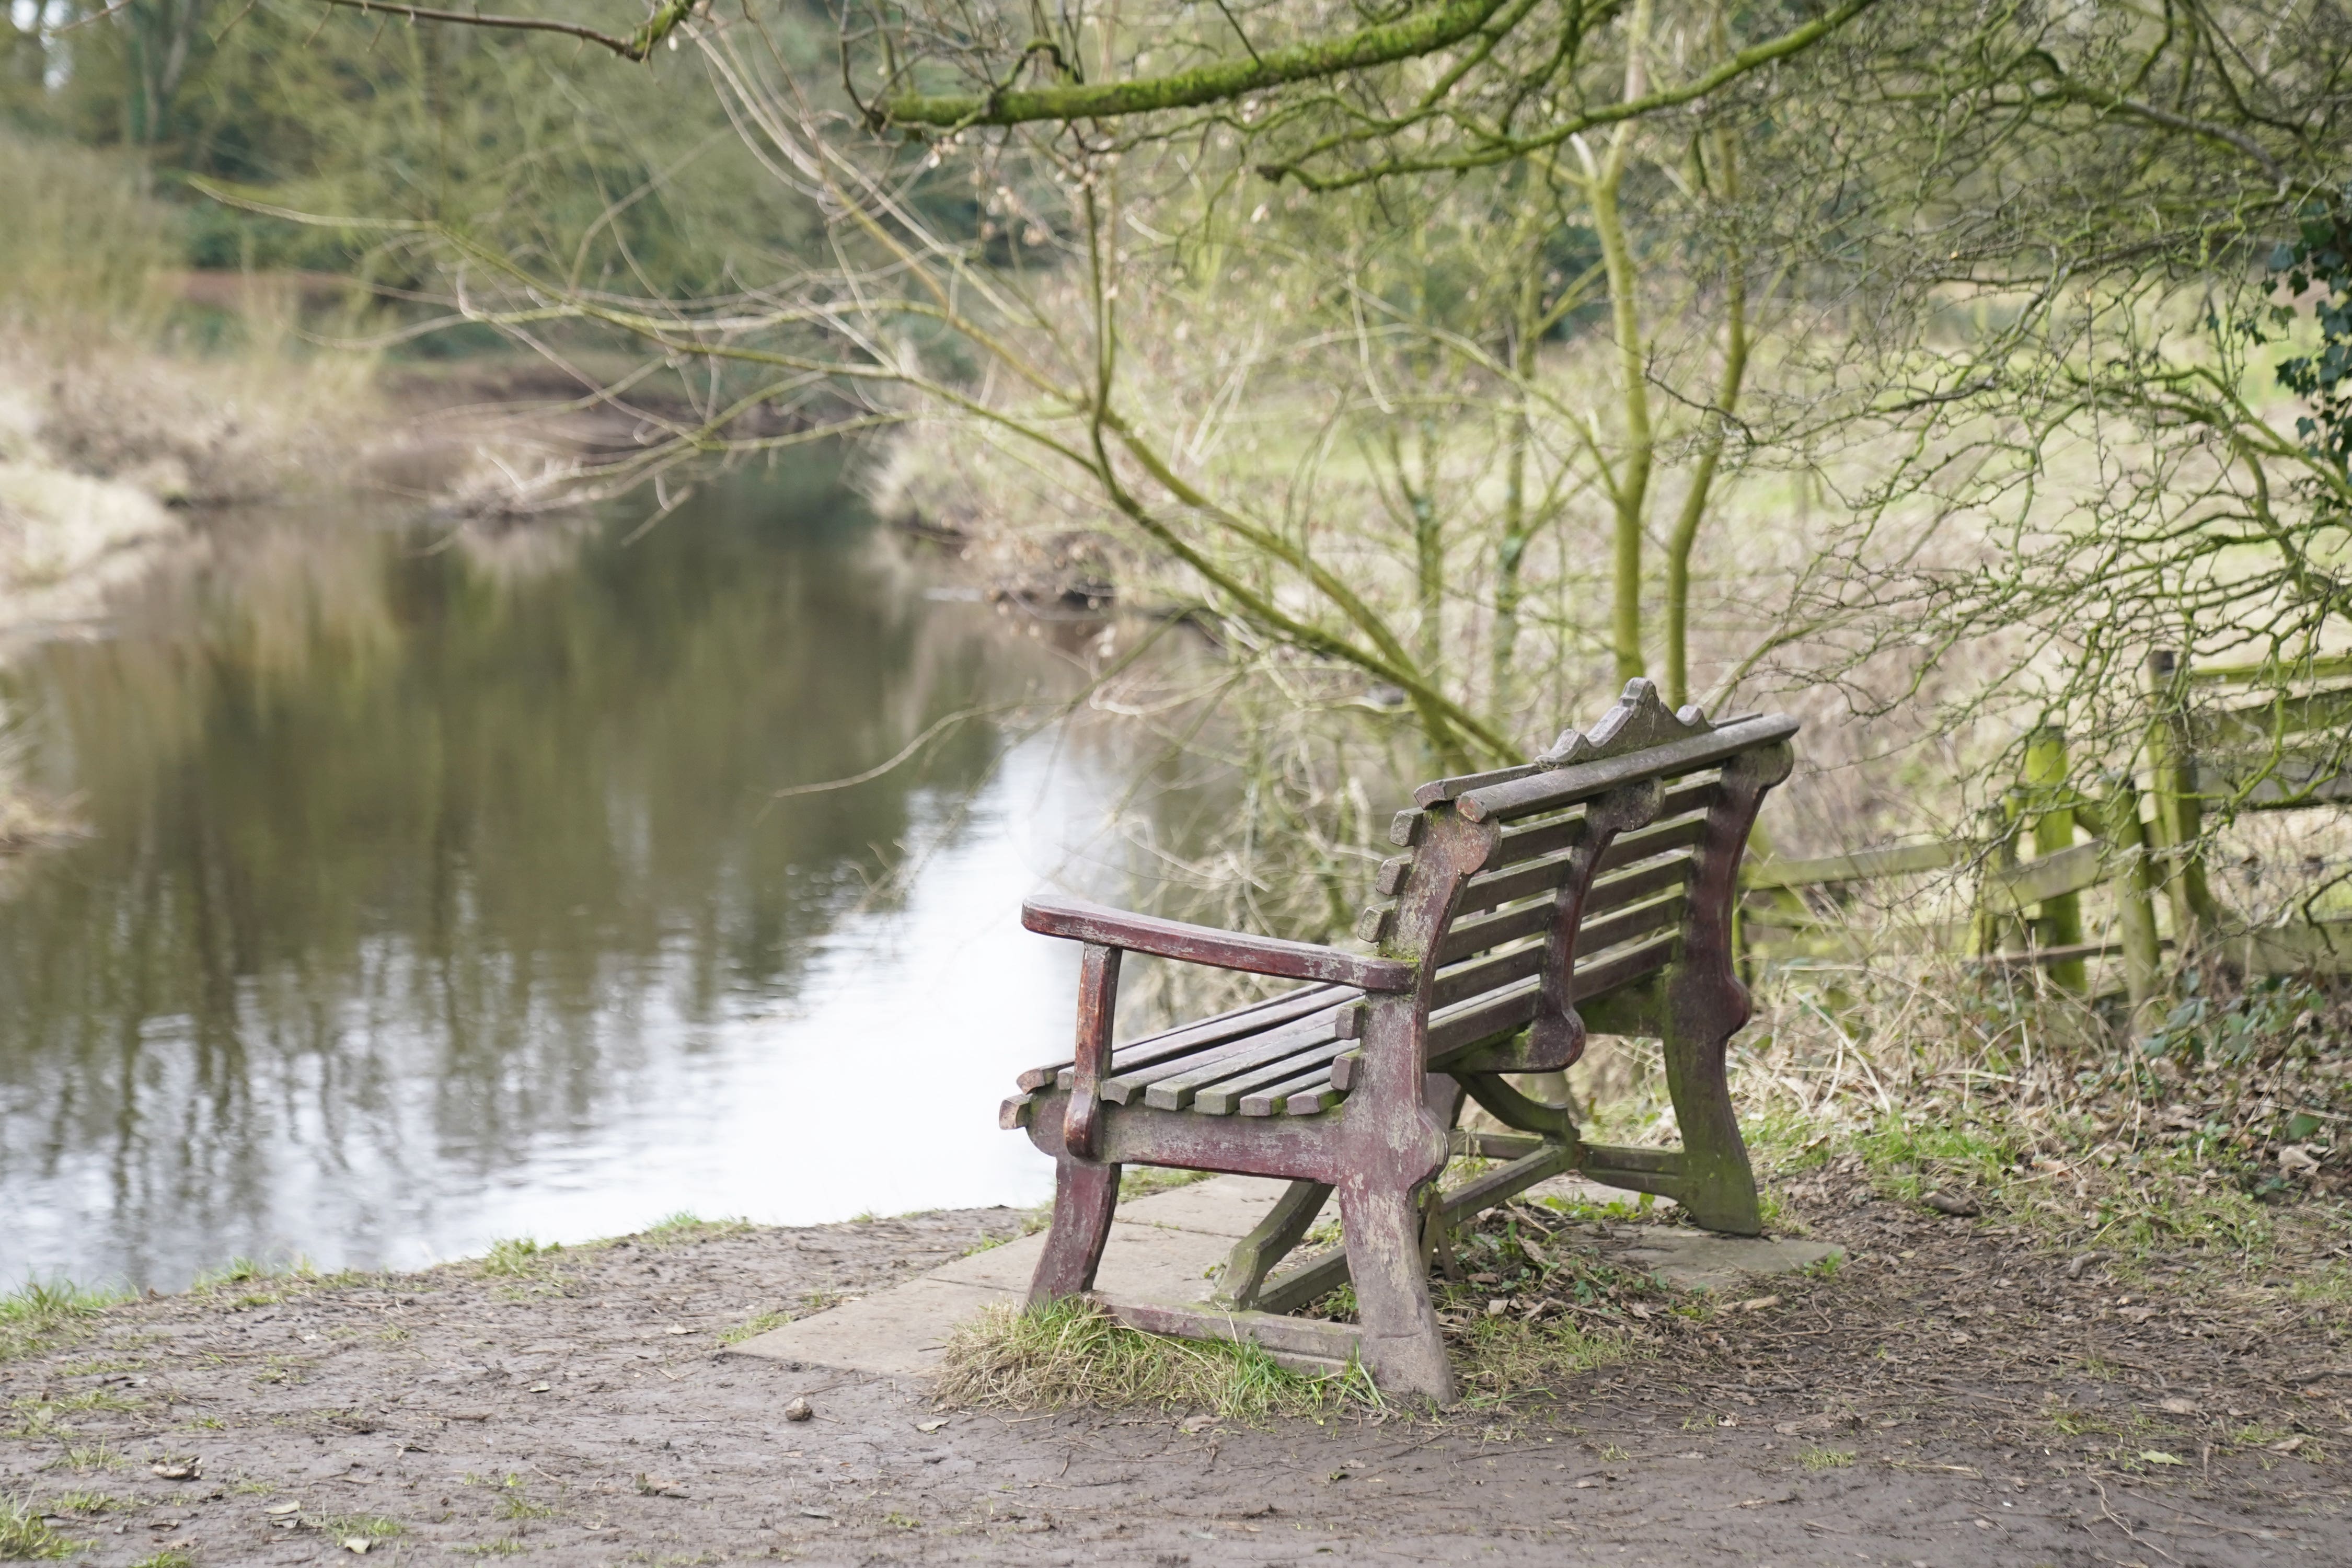 The bench where Ms Bulley’s phone was found, on the banks of the River Wyre